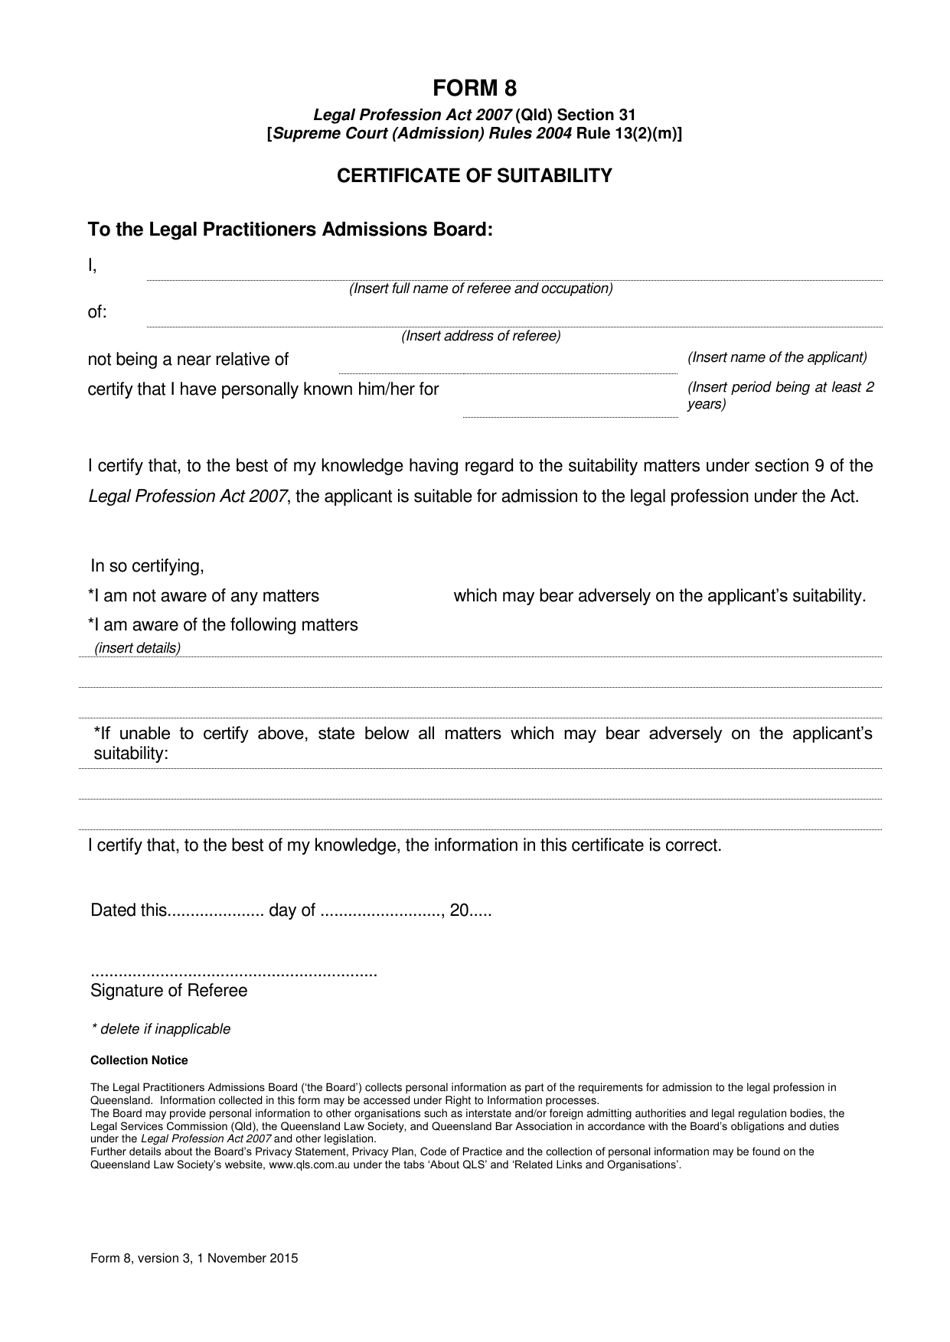 Form 8 Certificate of Suitability - Queensland, Australia, Page 1